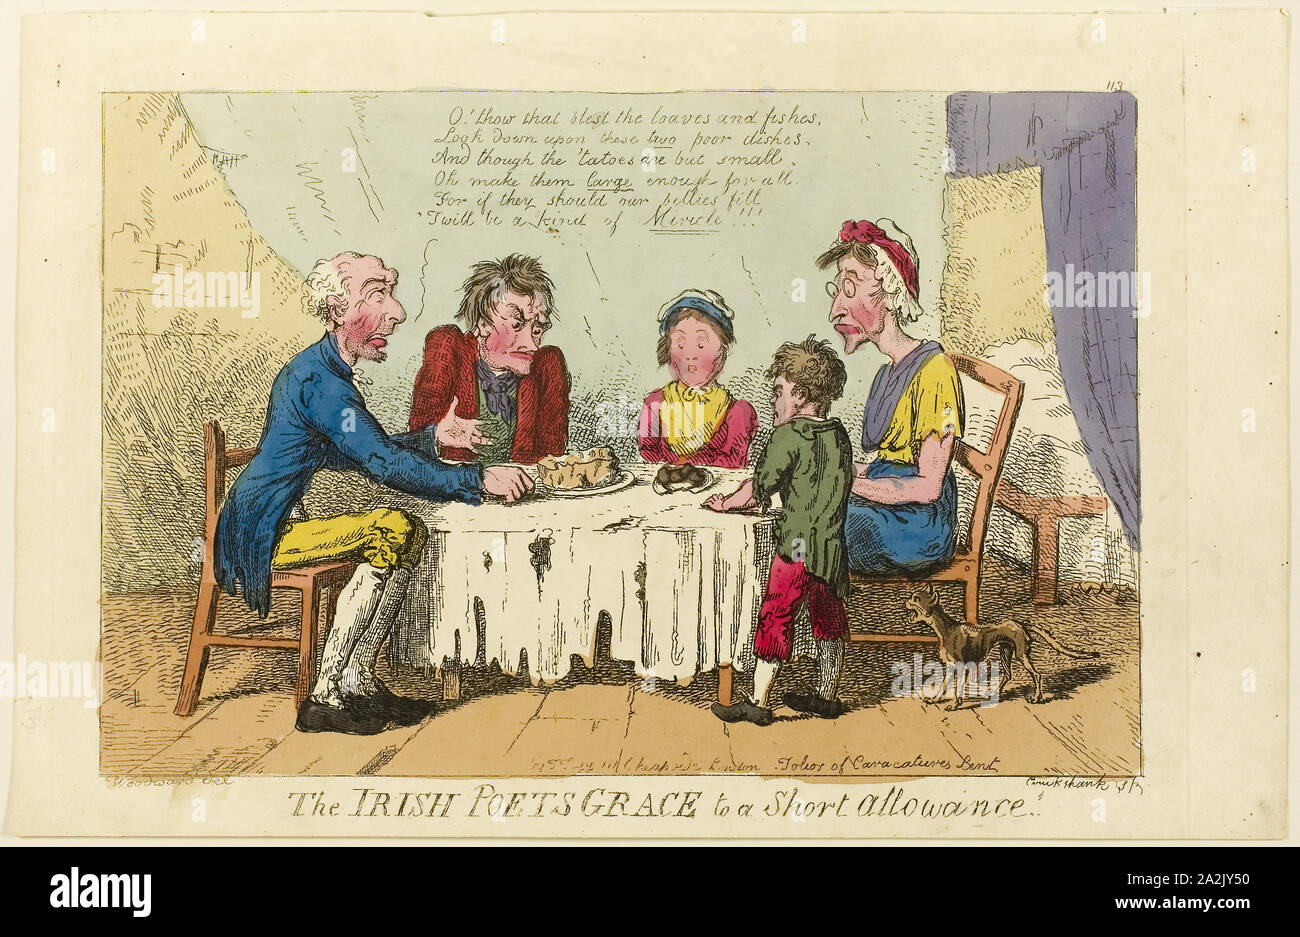 Irish Poets Grace to Short Allowance!, 1805–1810, Isaac Cruikshank (English, 1764-1811), published by Thomas Tegg (English, 1776-1846), England, Etching with hand-coloring on wove paper, 210 × 320 mm (image), 252 × 390 mm (sheet, cut within plate mark Stock Photo